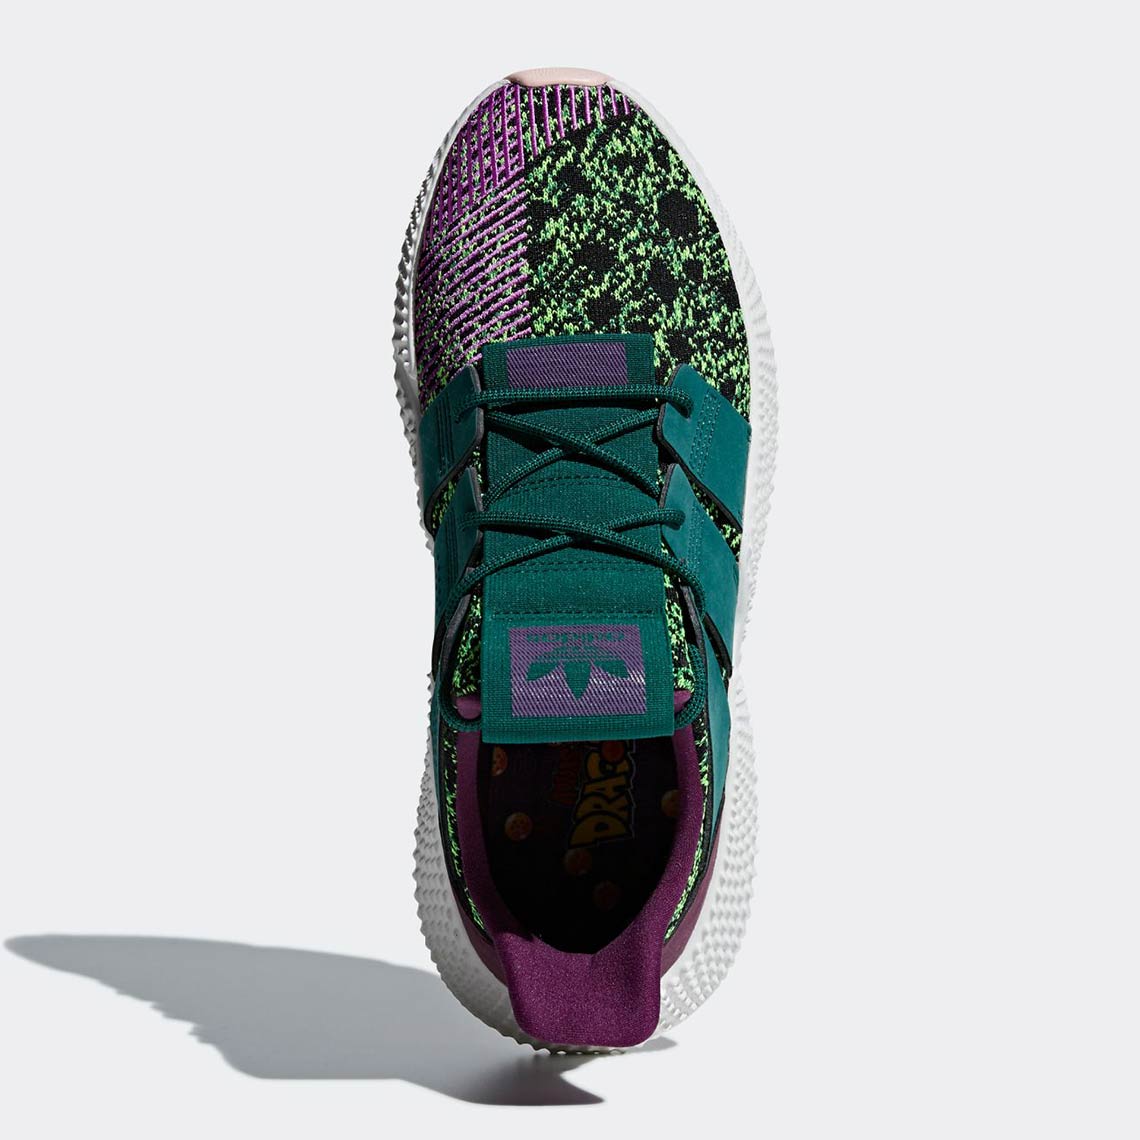 adidas Prophere Cell Dragon Release Info SneakerNews.com